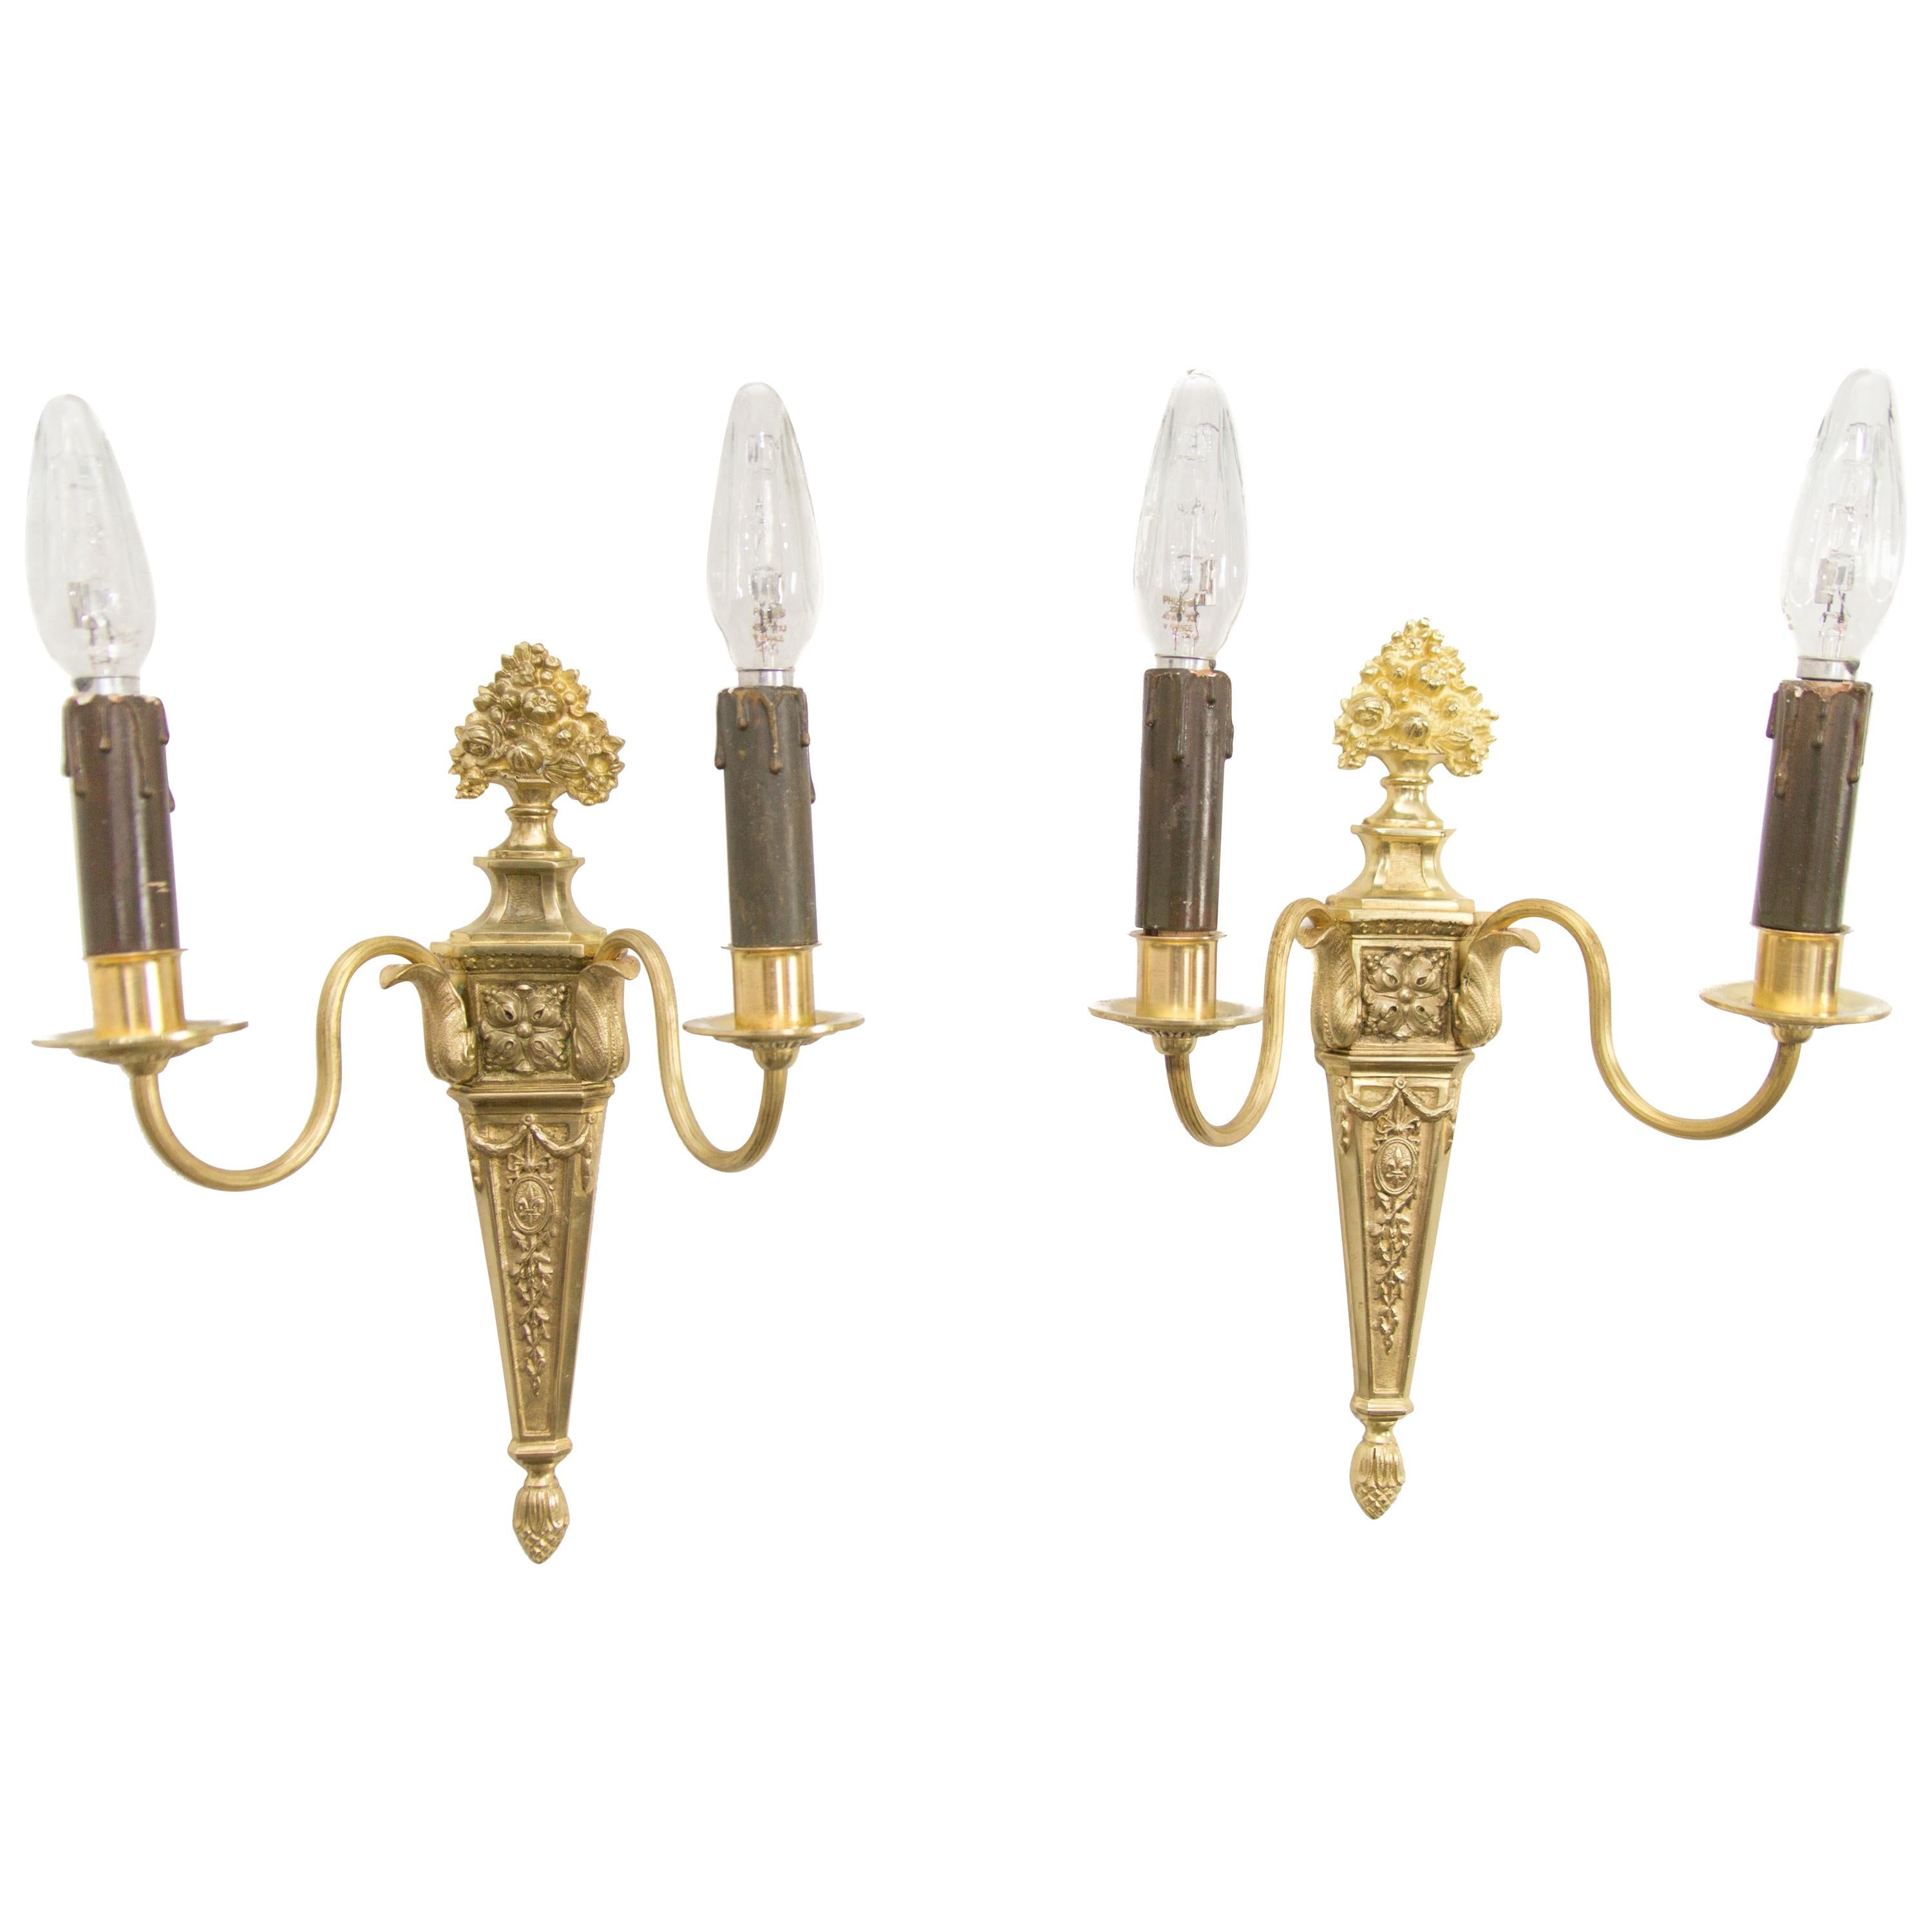 Pair of French Louis XVI Style Two-Light Gilt Bronze Sconces